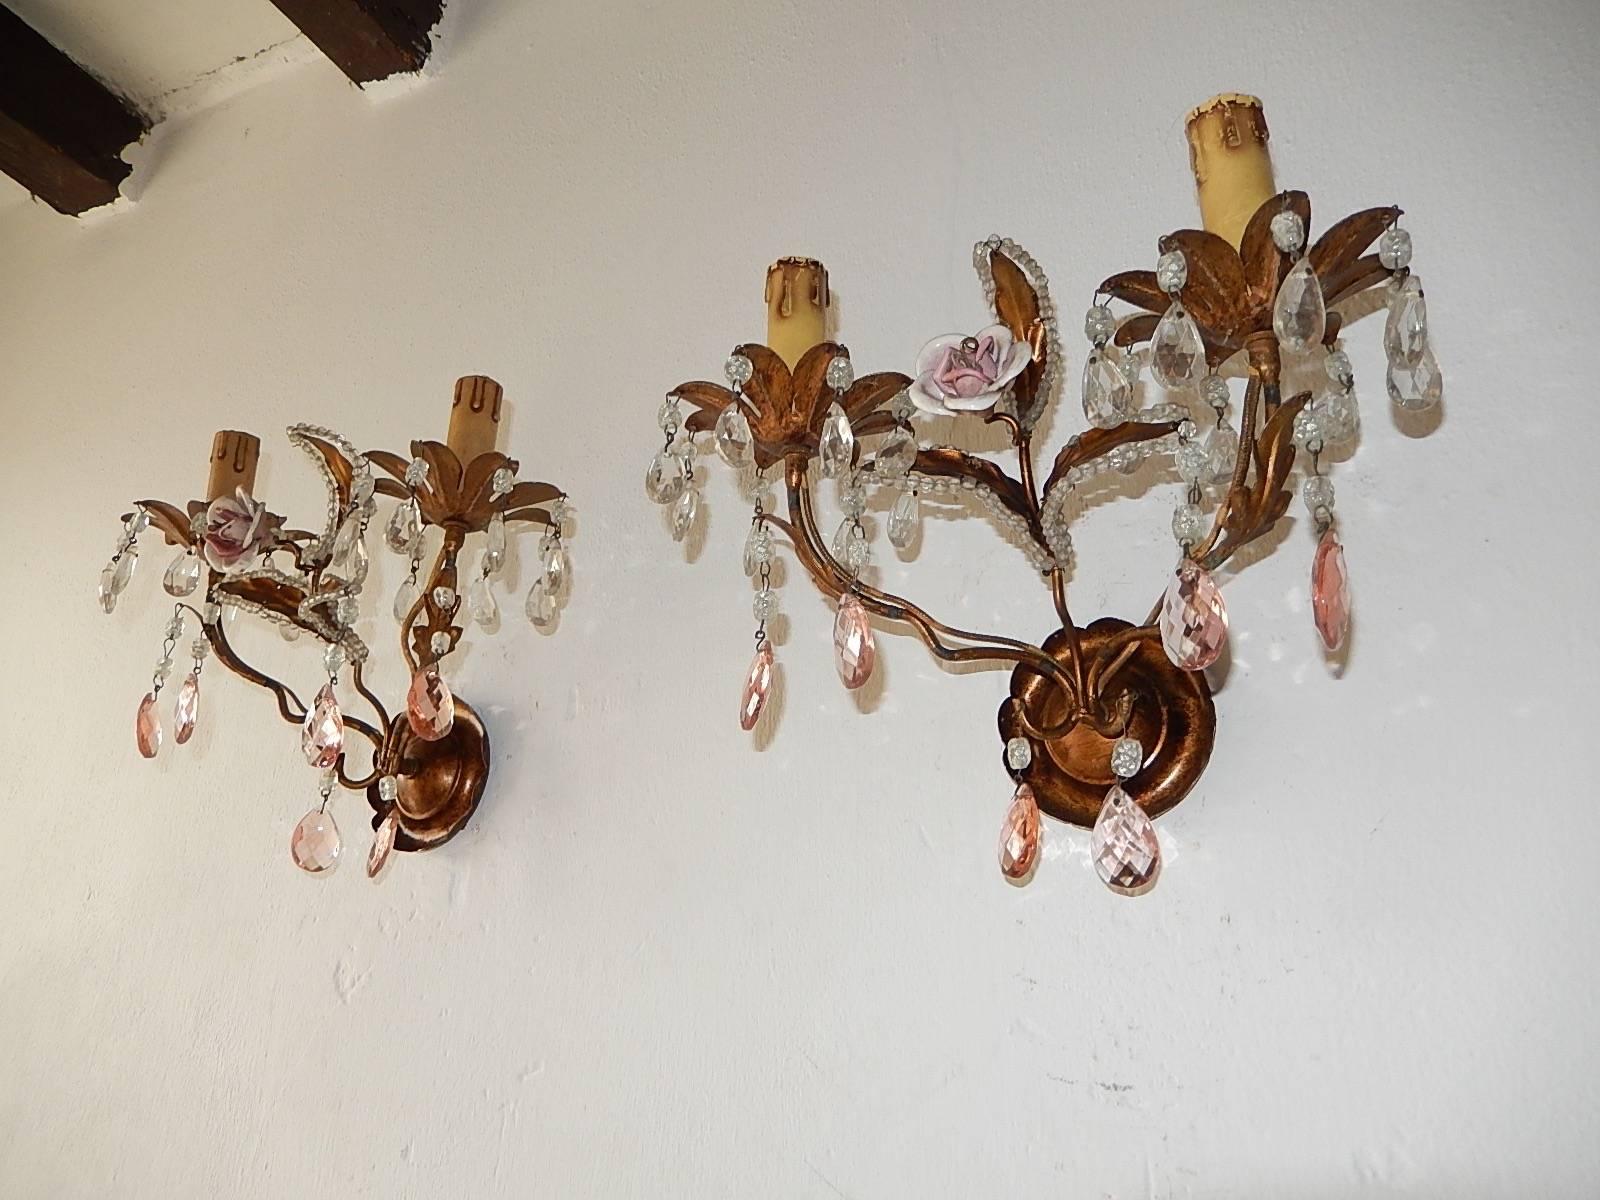 Matching chandelier is available as well. Housing two lights each. Tole with beads, prisms and pink porcelain roses. Re-wired and ready to hang. Free priority shipping from Italy.